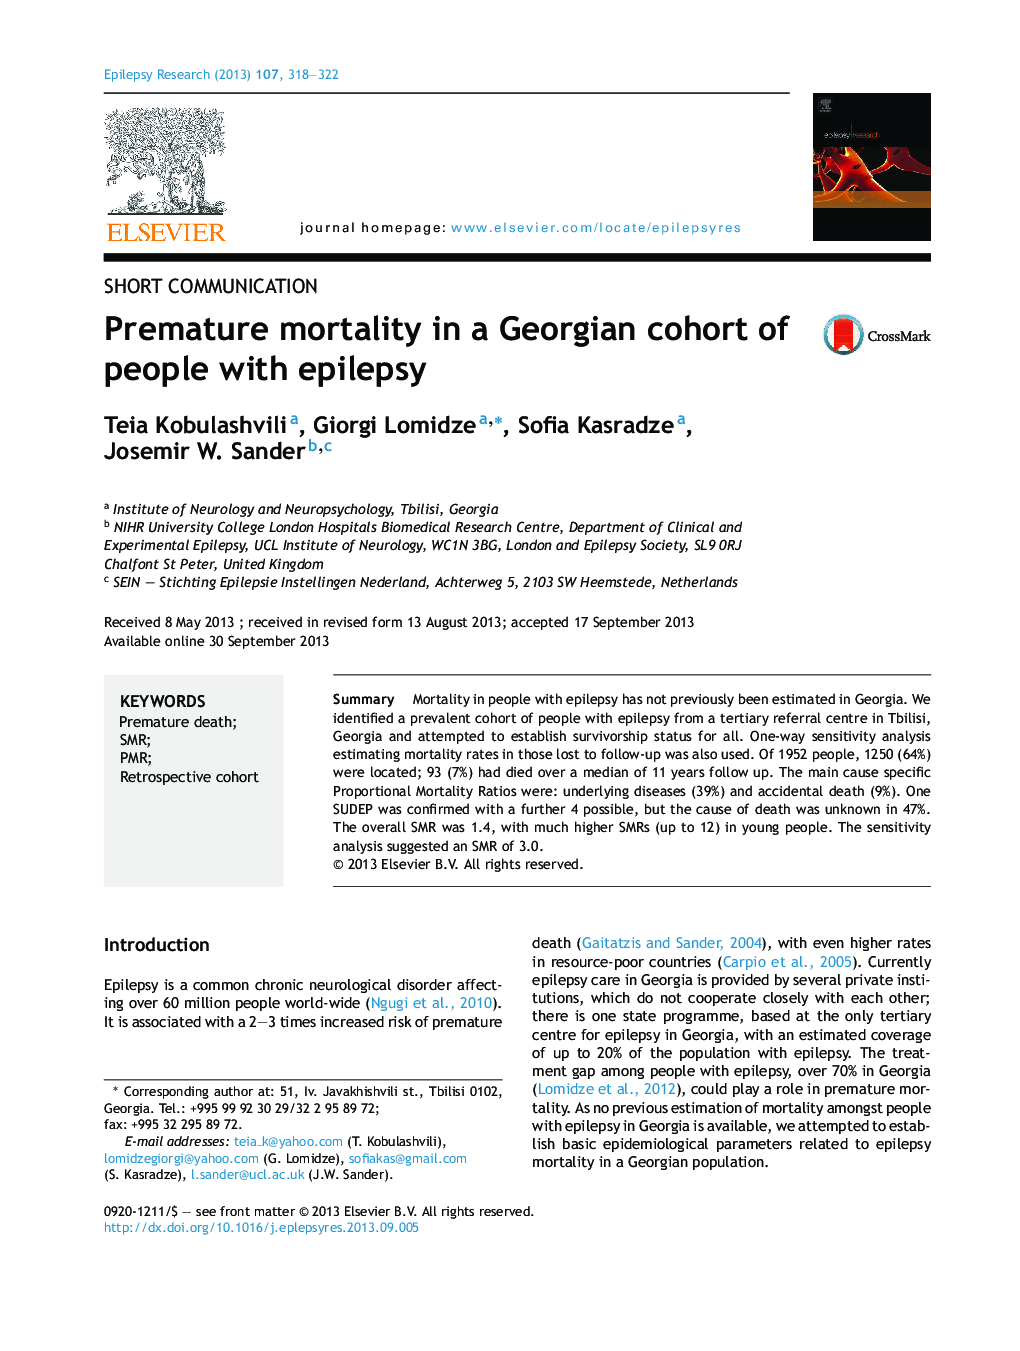 Premature mortality in a Georgian cohort of people with epilepsy